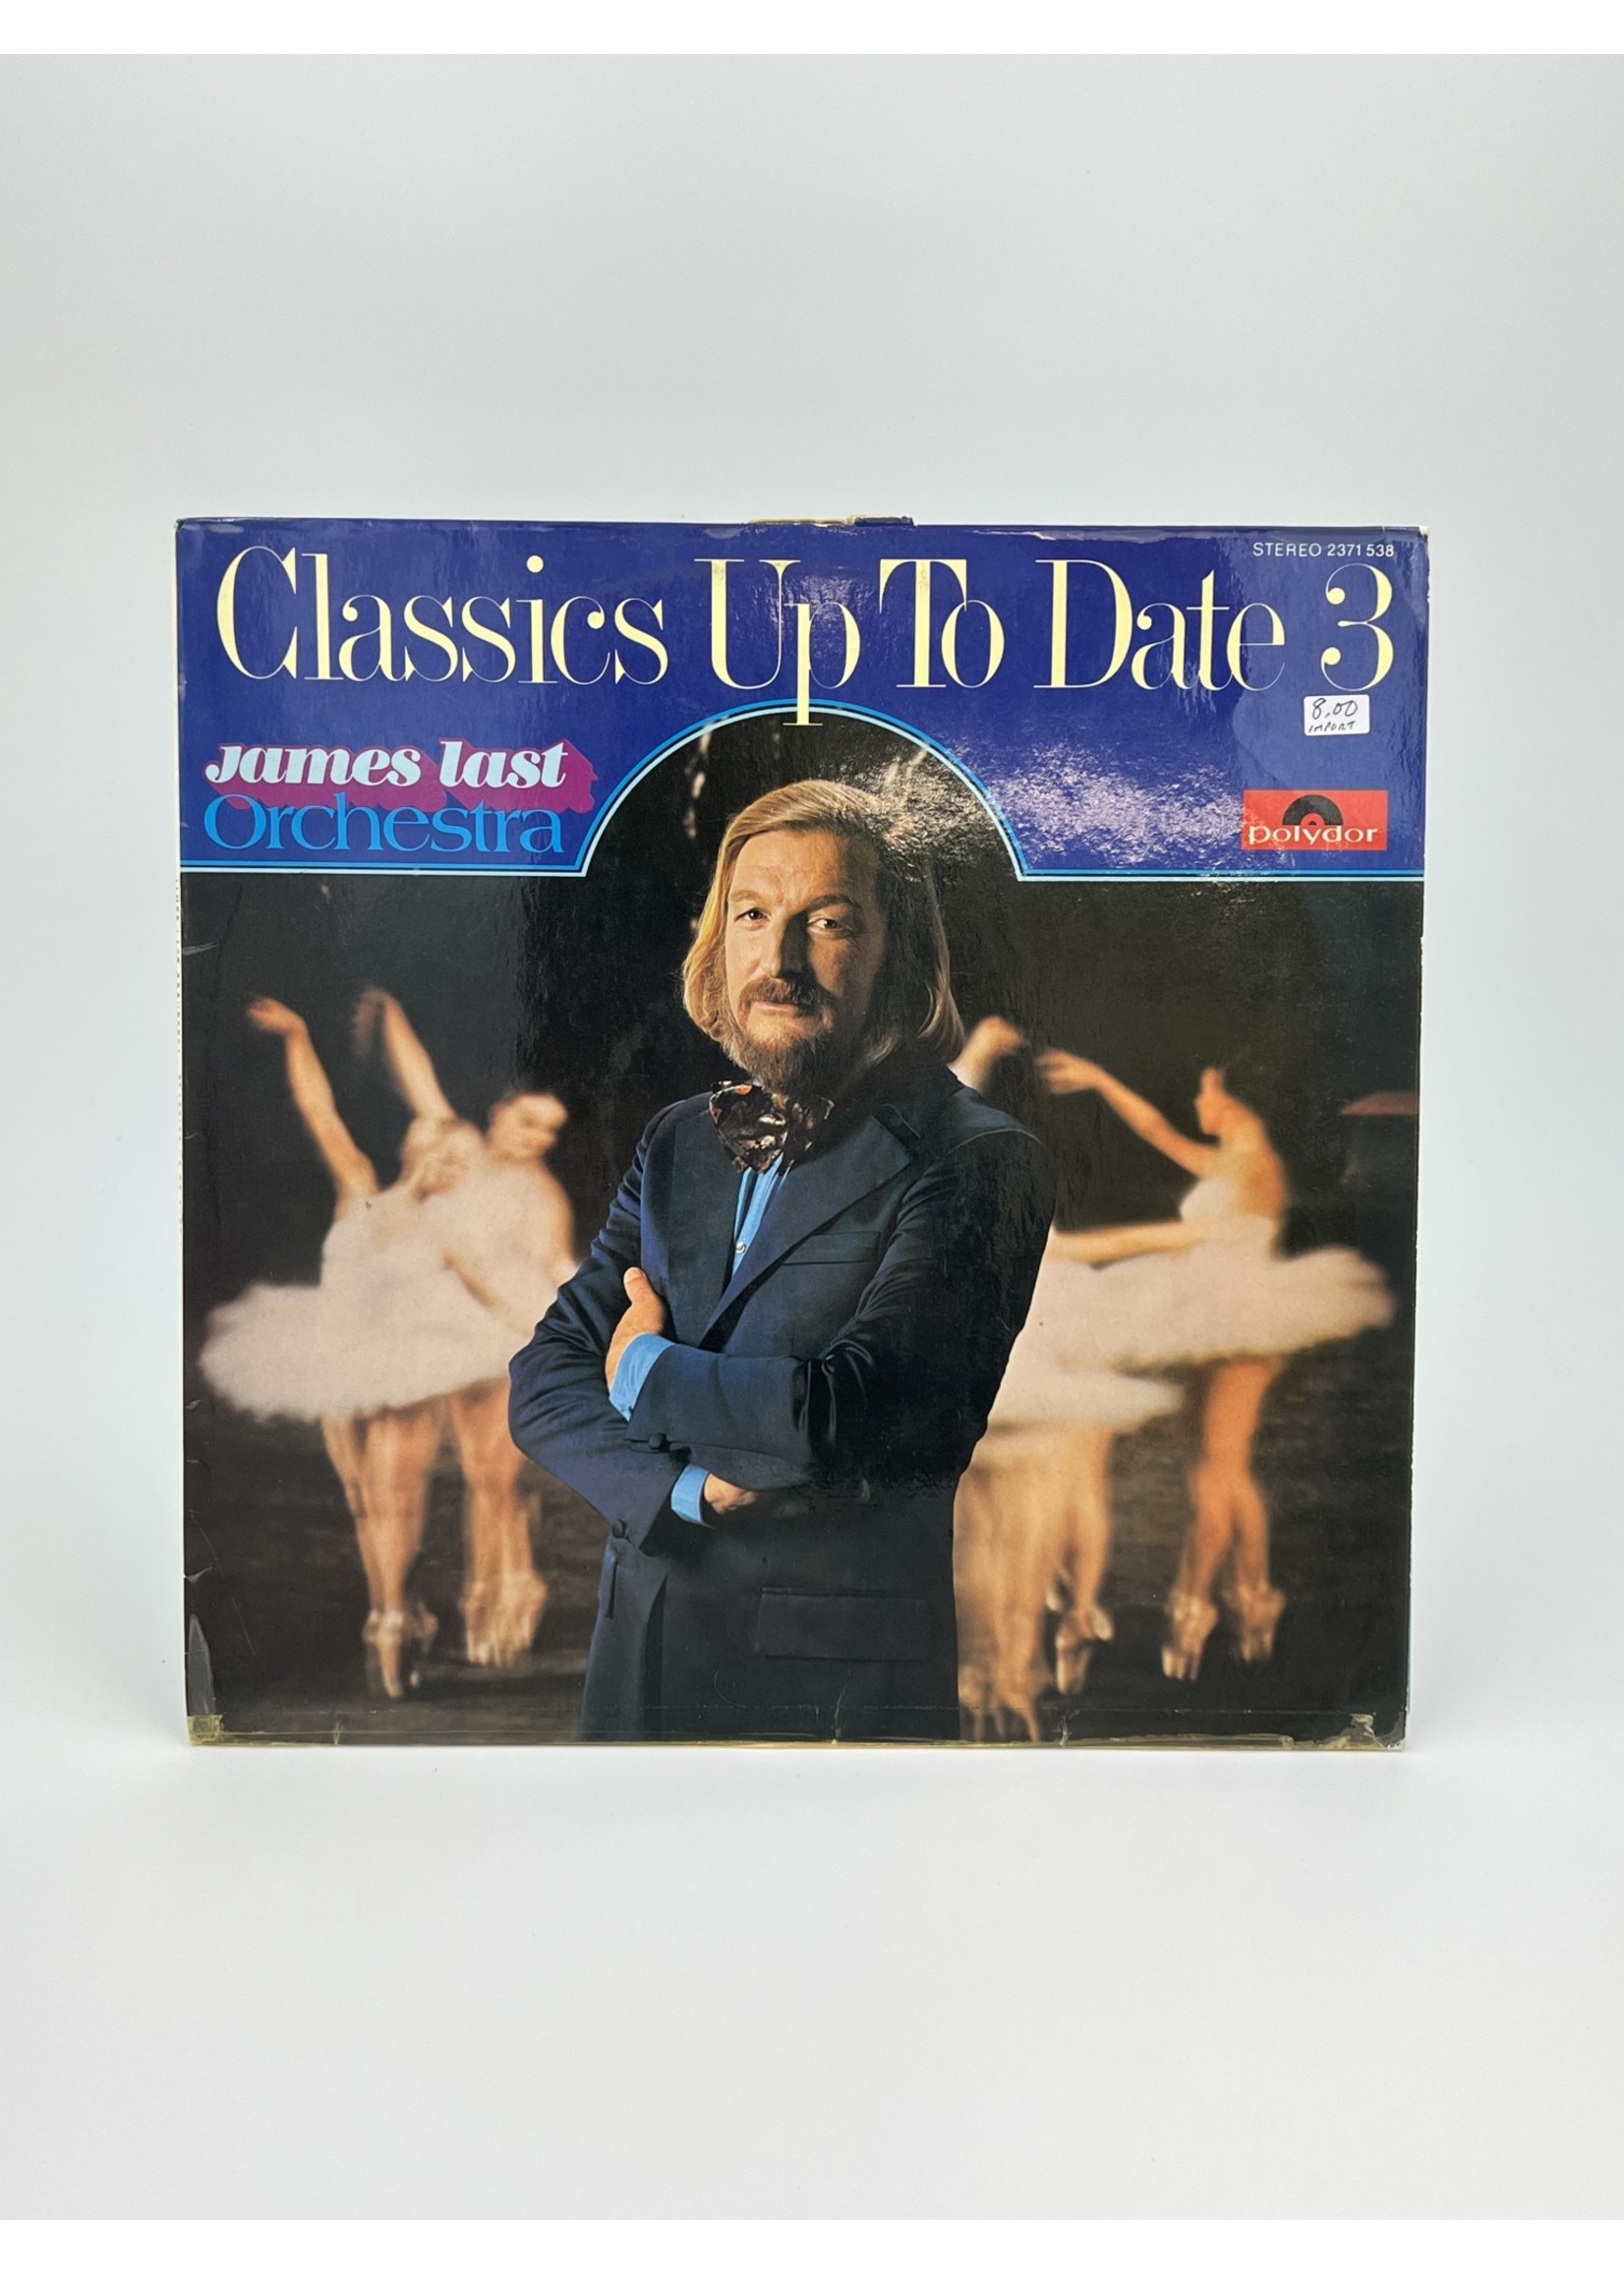 LP James Last Orchestra Classics Up To Date 3 LP Record